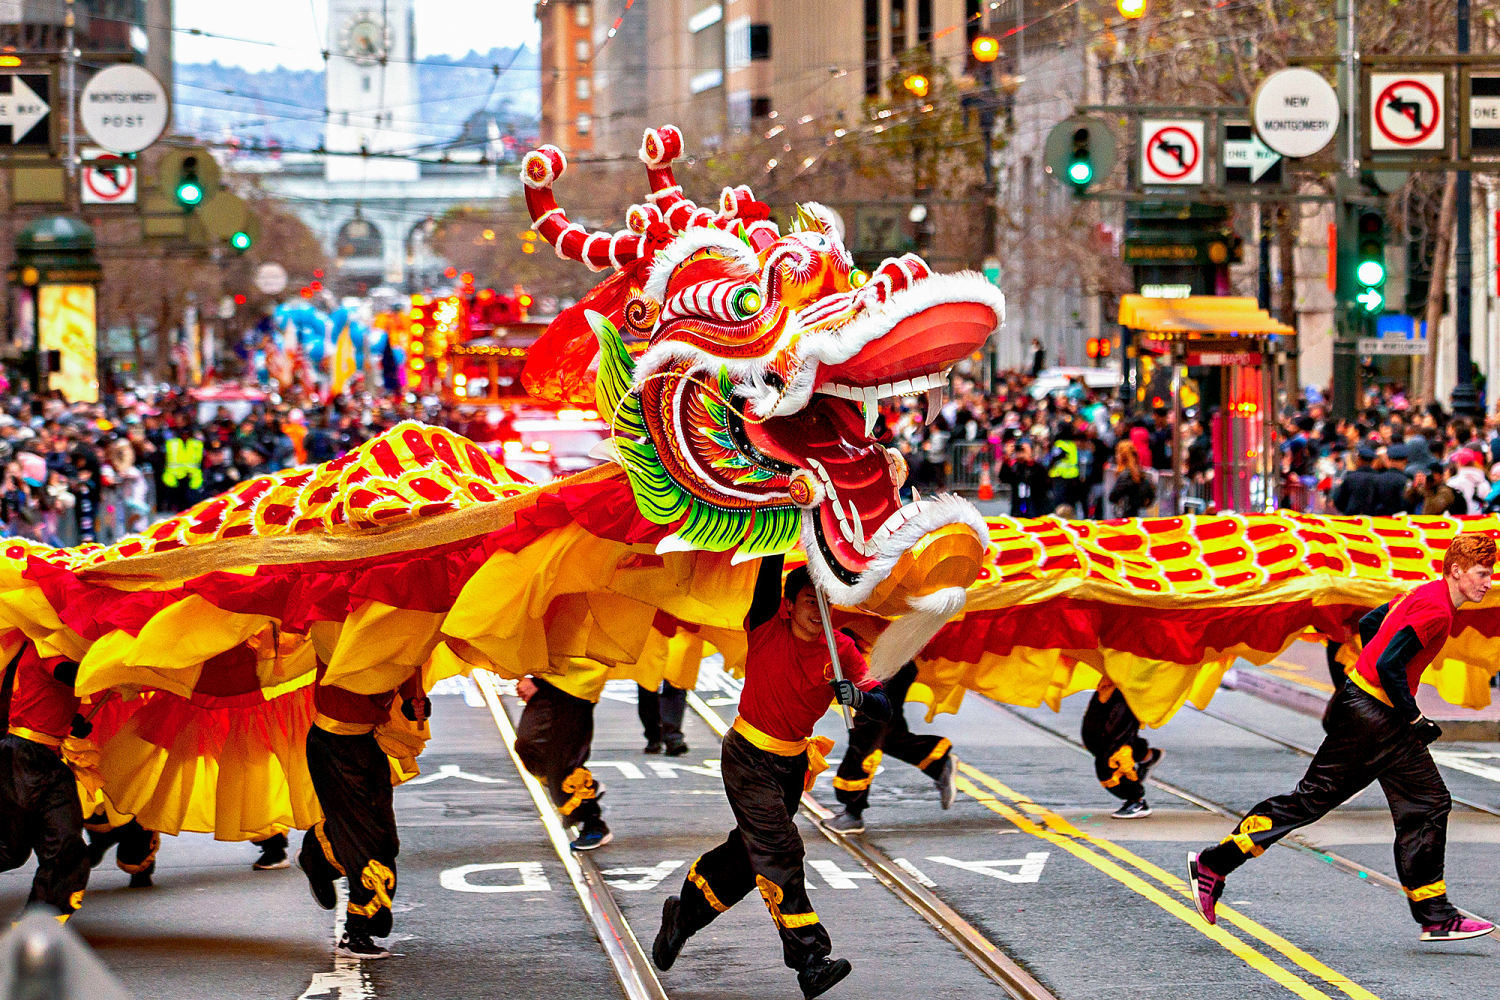 Biden special counsel report fallout and celebrating Lunar New Year